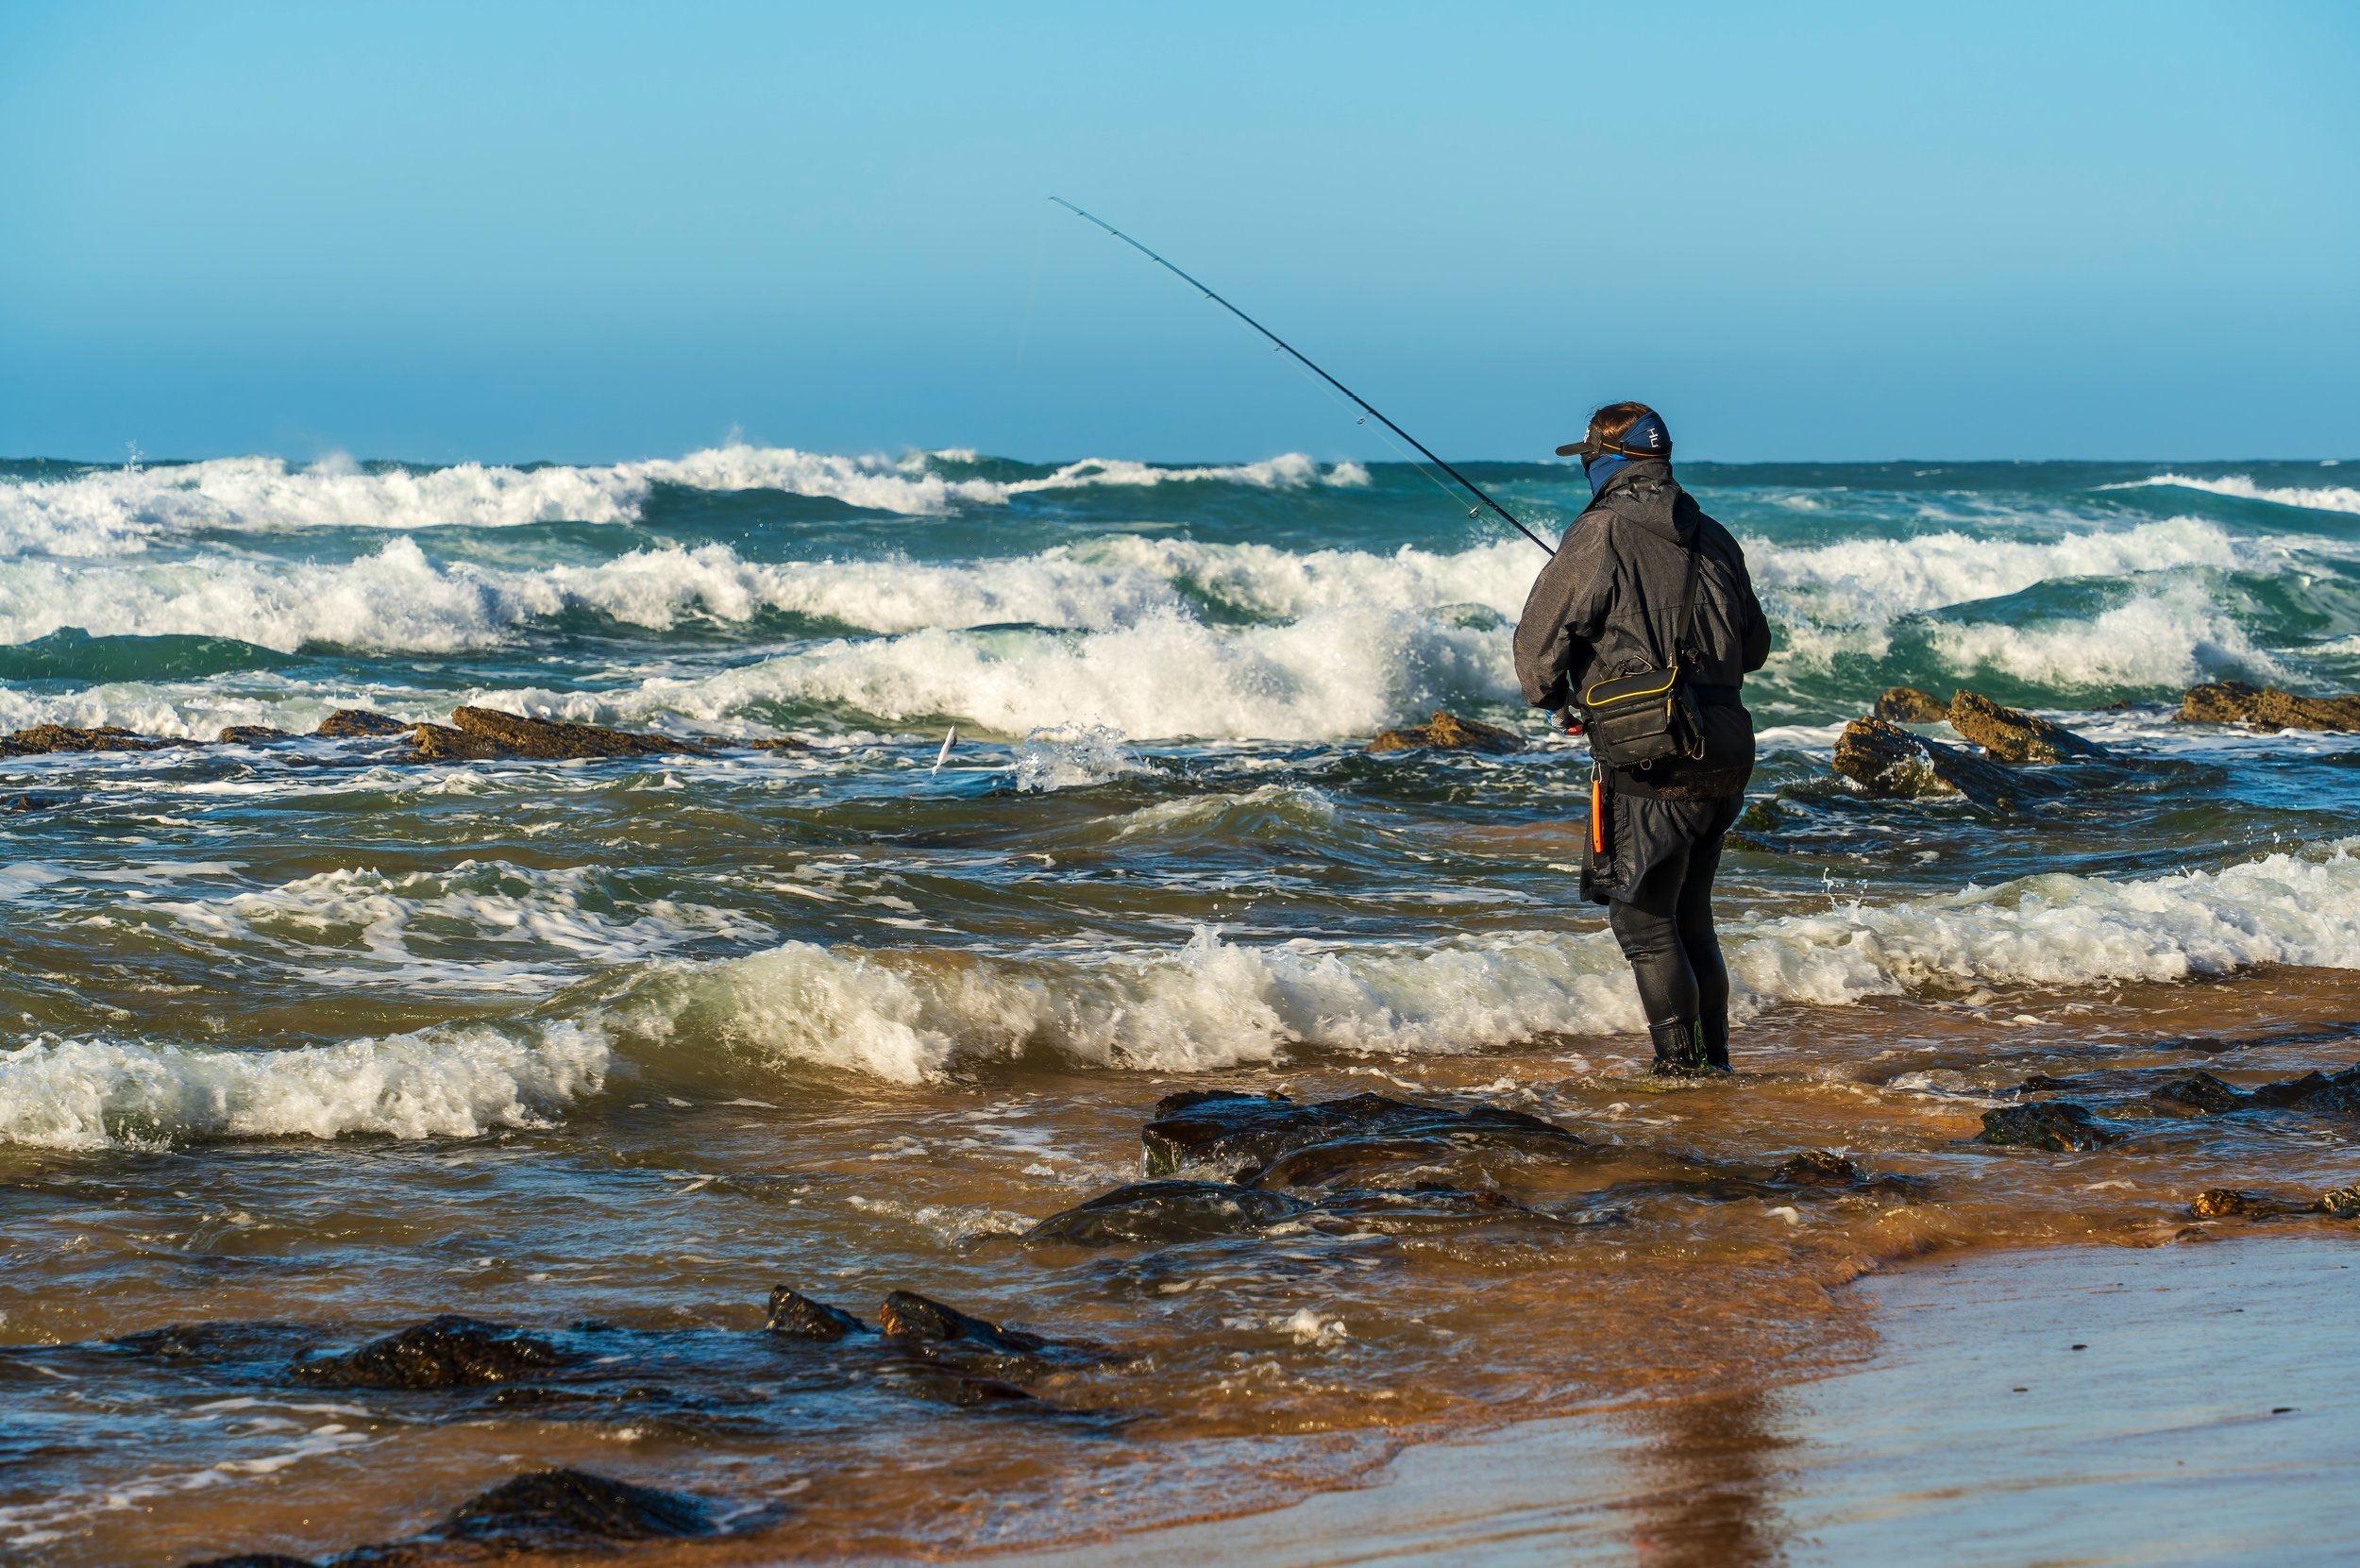 Bass fishing in SW Portugal, Part 3 - the rods, reels and lines we